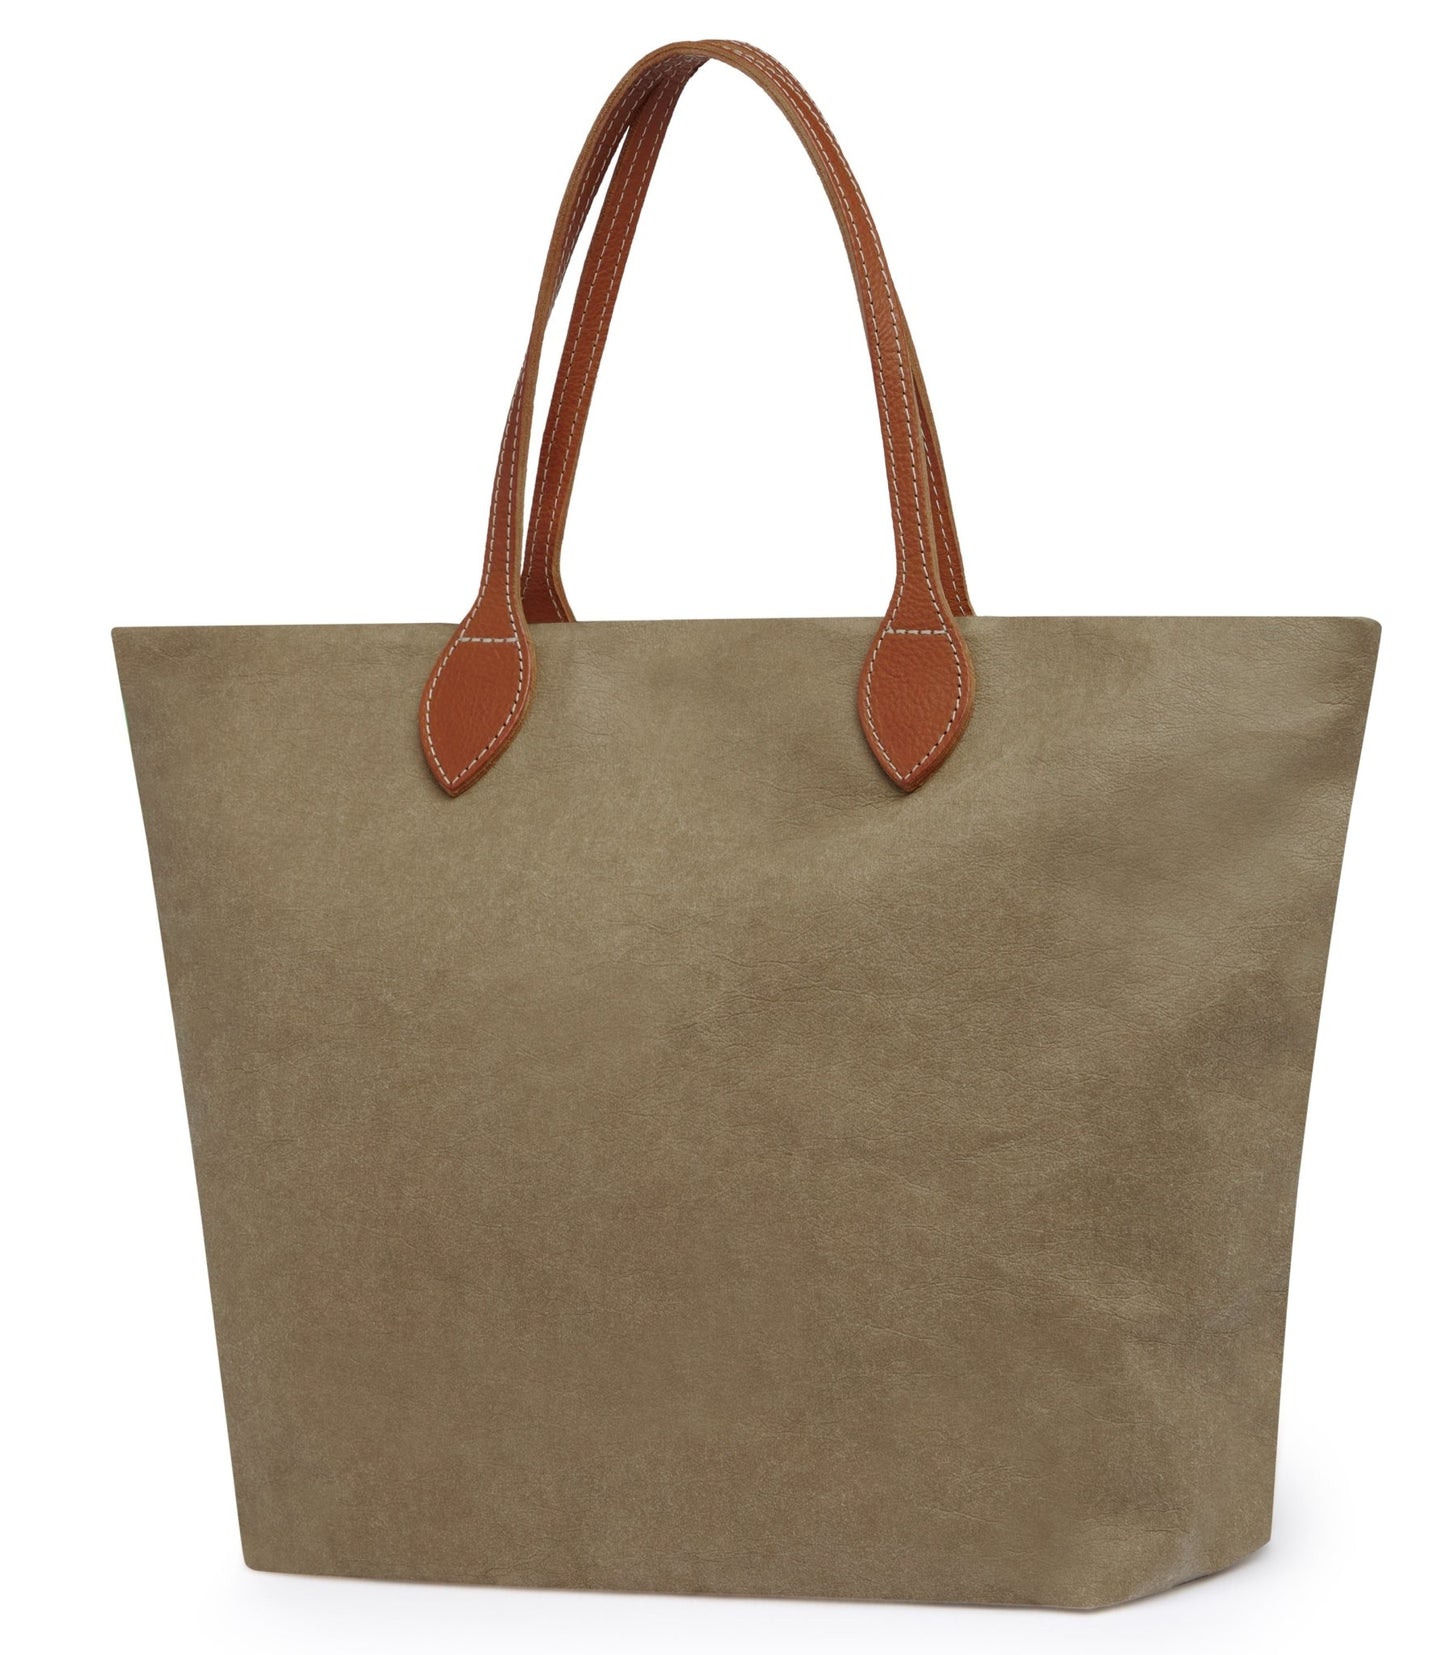 A large washable paper tote is shown. It has two long tan leather handles. The bag shown is in an olive colour.